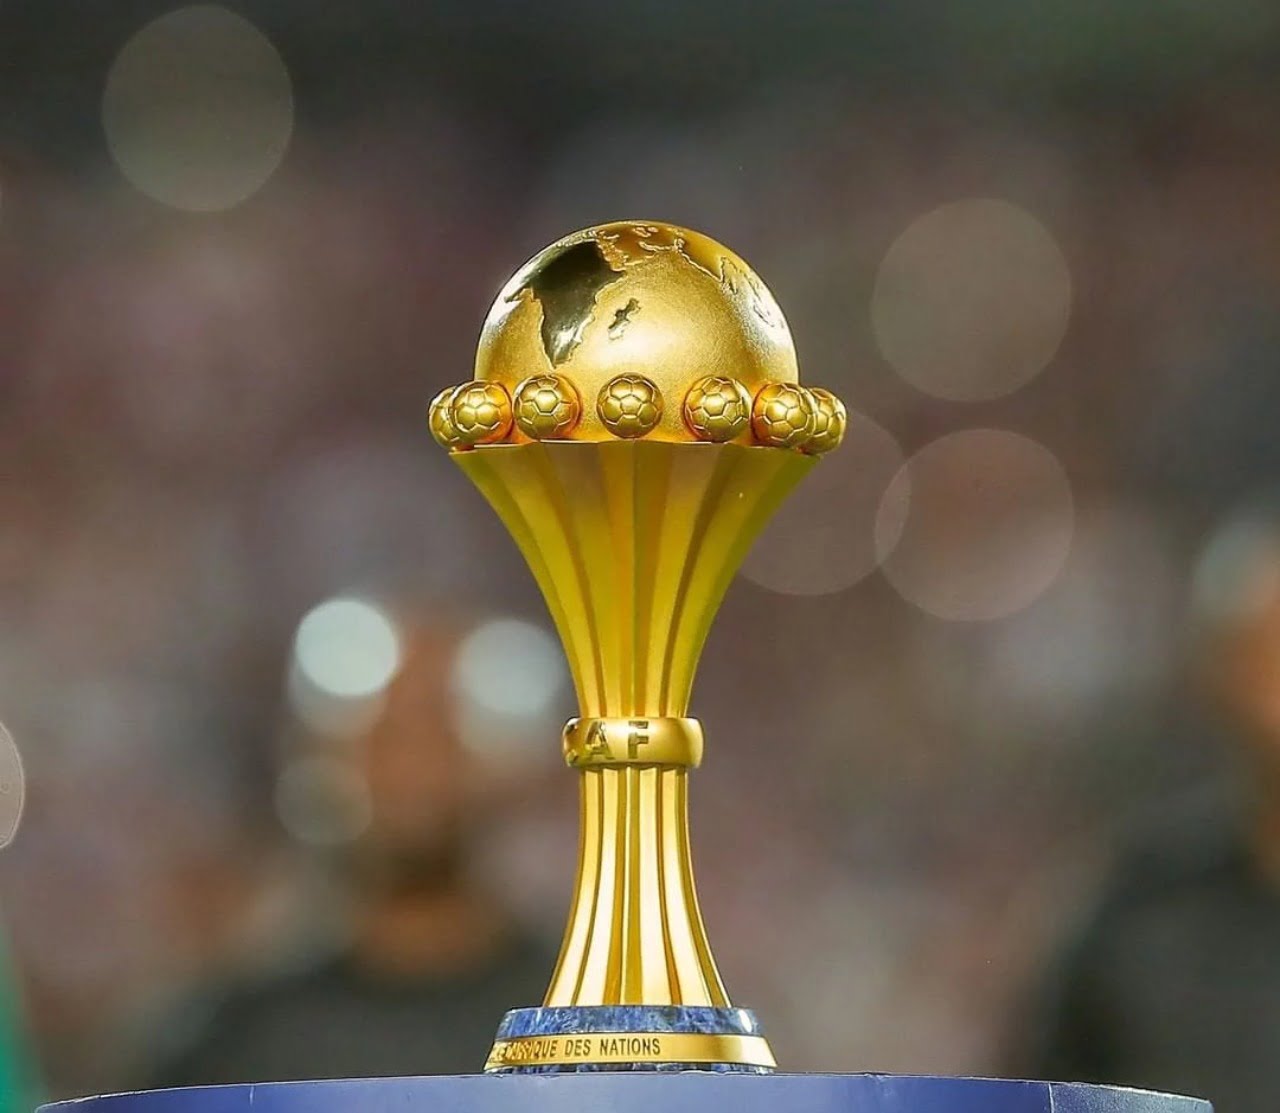 AFCON 2021 draw: Nigeria, Egypt, Ghana, Cameroon, others discover opponents [Full list]